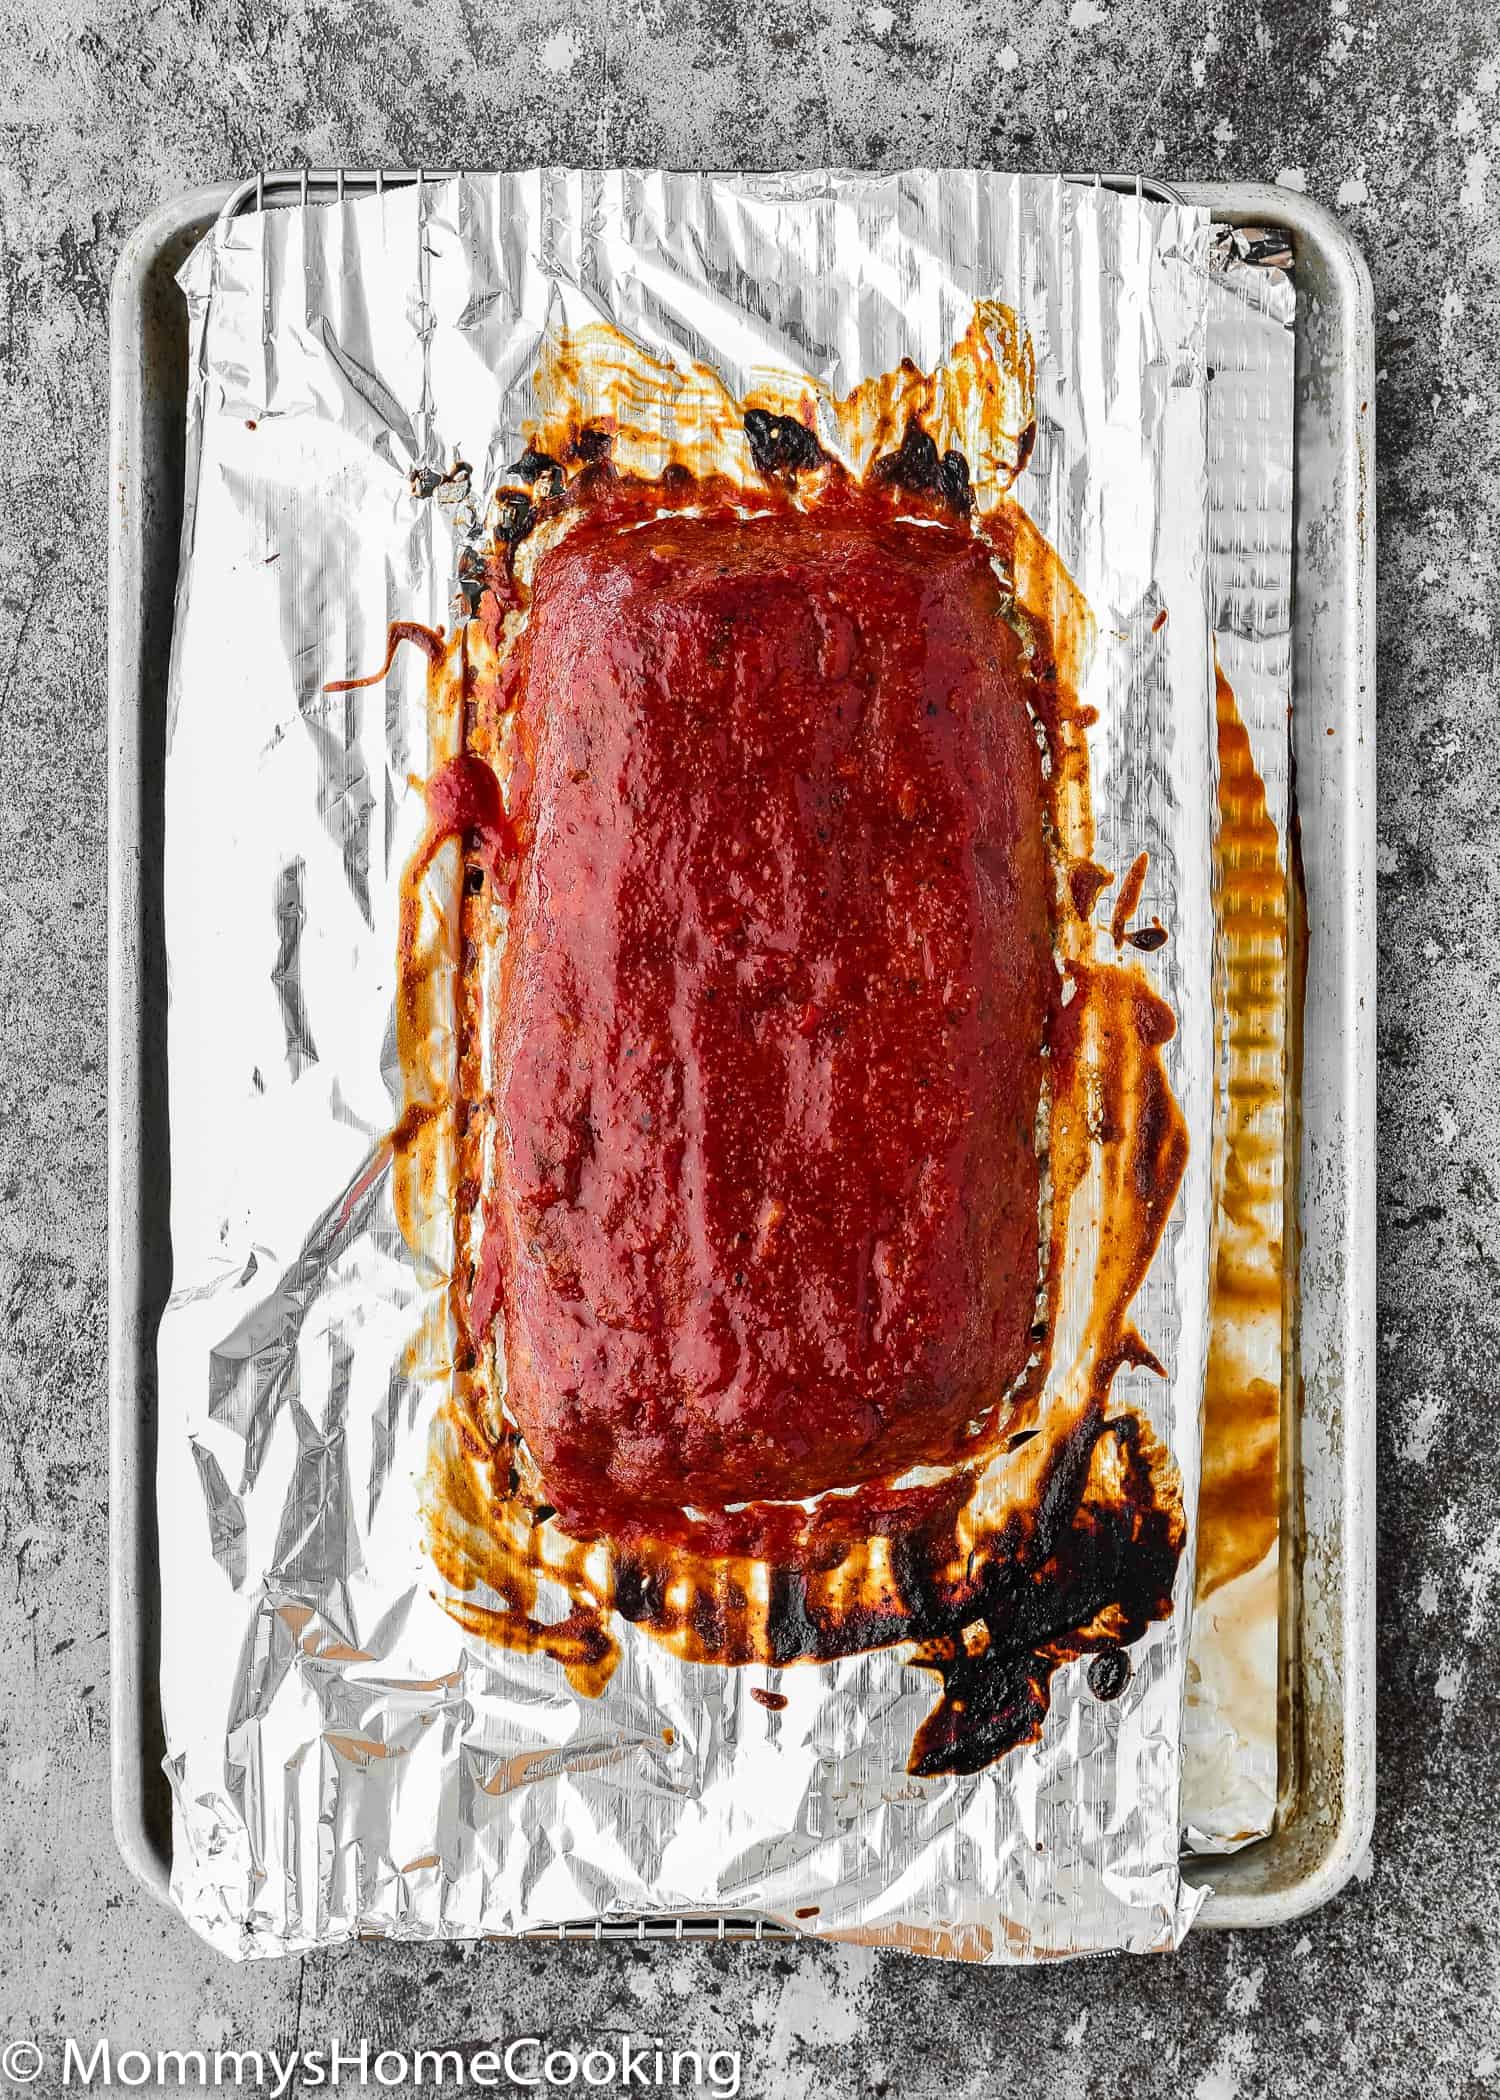 Baked Eggless Meatloaf over a baking tray with meatloaf sauce